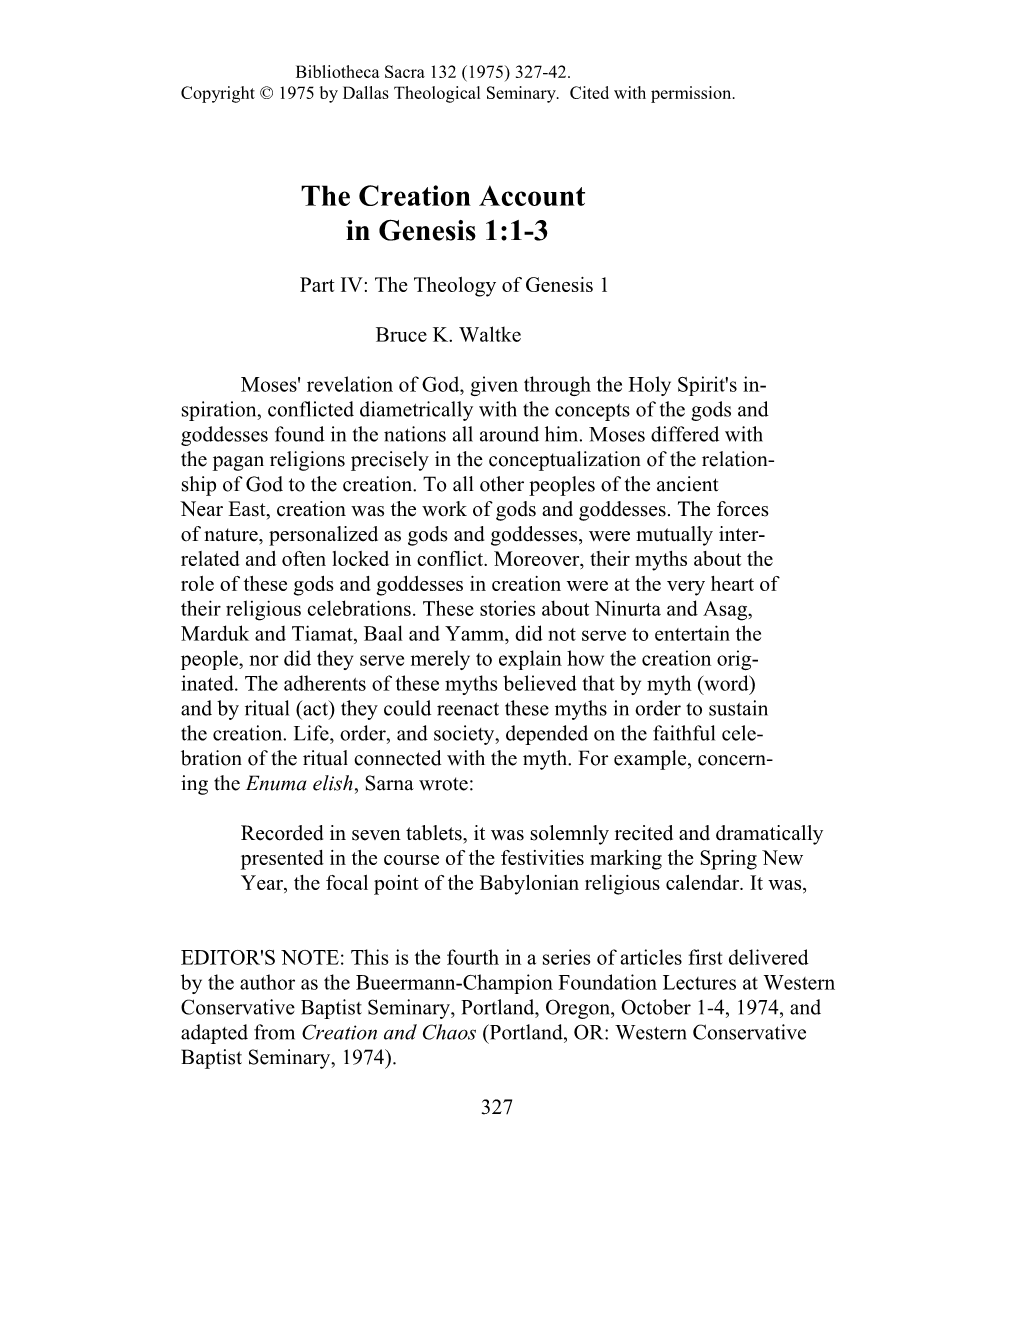 The Creation Account